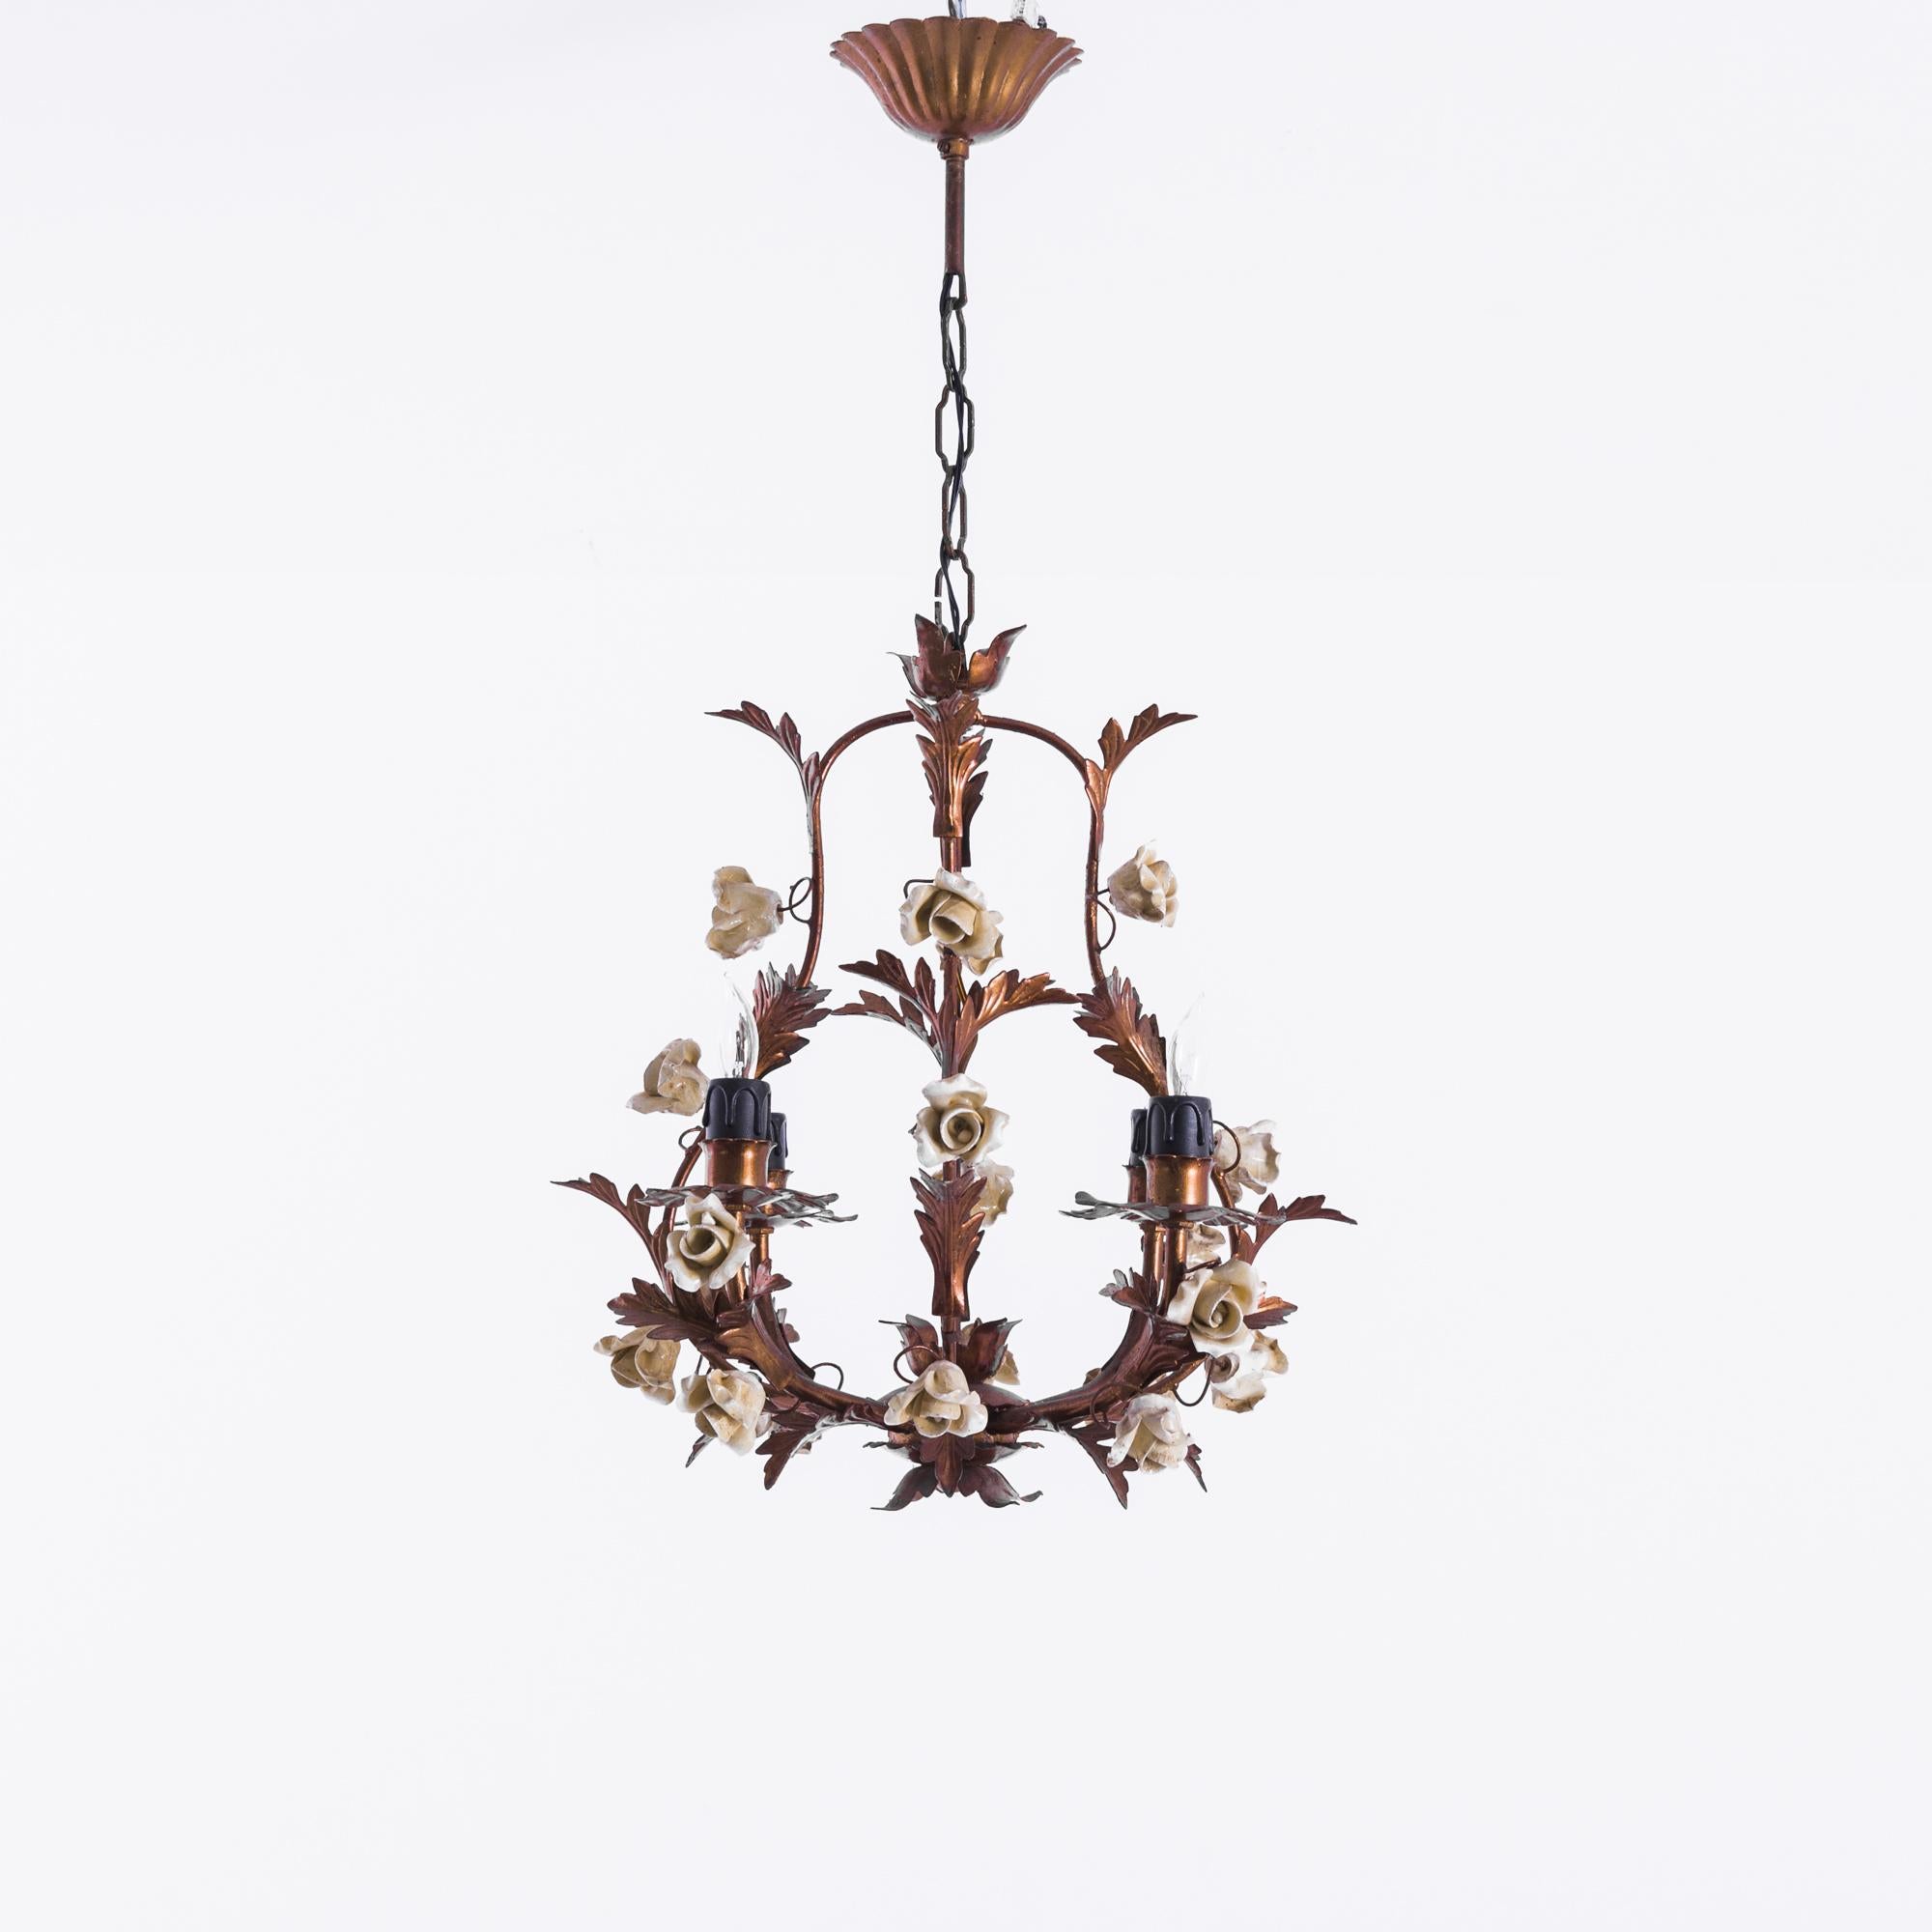 A metal chandelier from 1960s France. Unruly and romantic. Lifelike metal flowers and leaves resemble roses trelessed around four upraised arms bearing candle bulbs. The sconces are embellished with petals and sepals, framing the light fixtures like